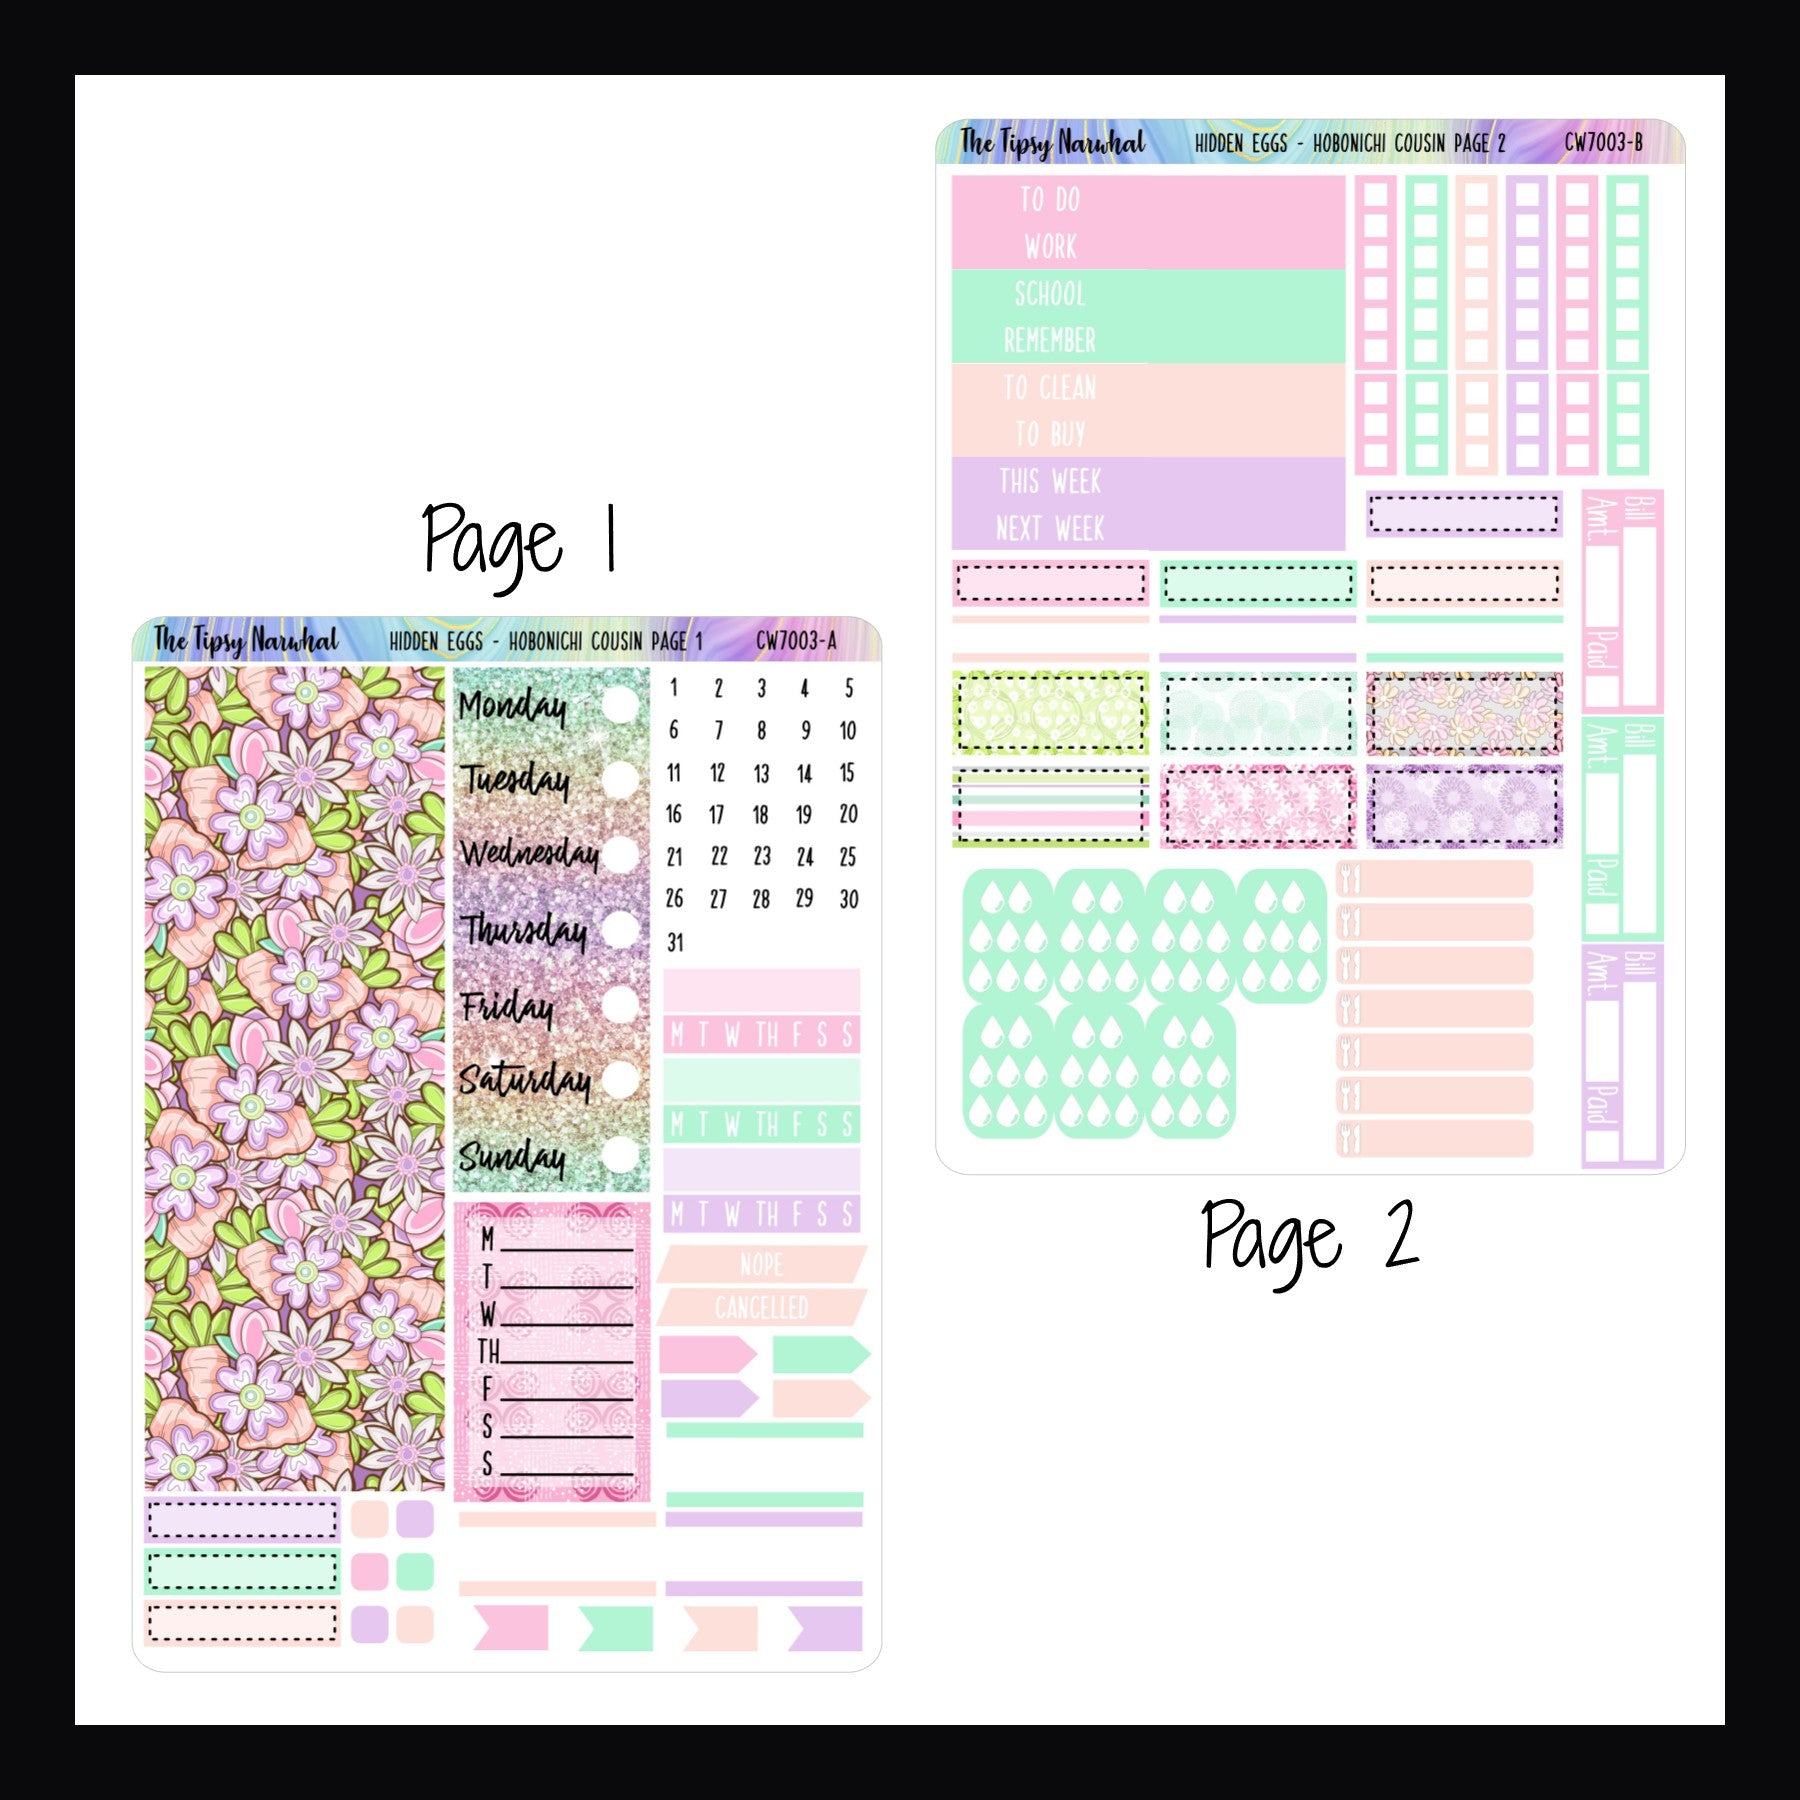 Digital Hidden Eggs Hobonichi Cousin Kit Pages 1 and 2.  Page 1 features washi strips, date covers, habit trackers, and weekly sticker.  Page 2 features headers, checklists, meal tracking, hydration tracking, bill tracking and appointment stickers. 